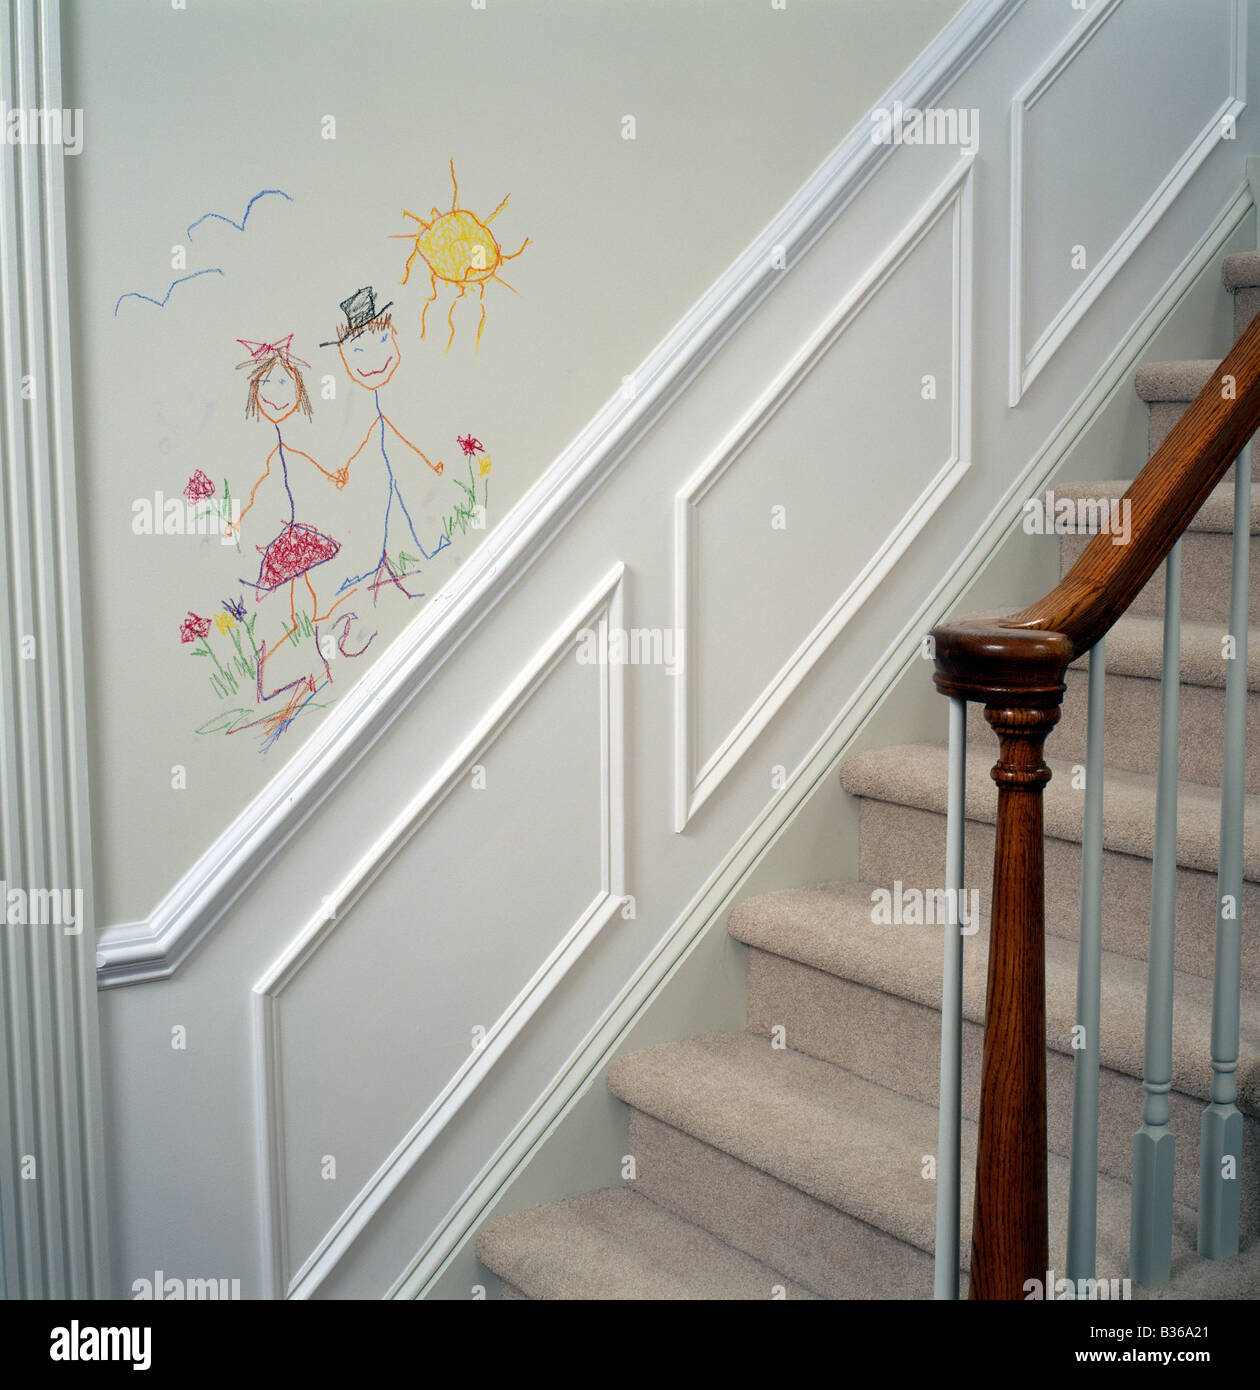 Child's crayon drawing on the wall of a private residence (home) Stock Photo